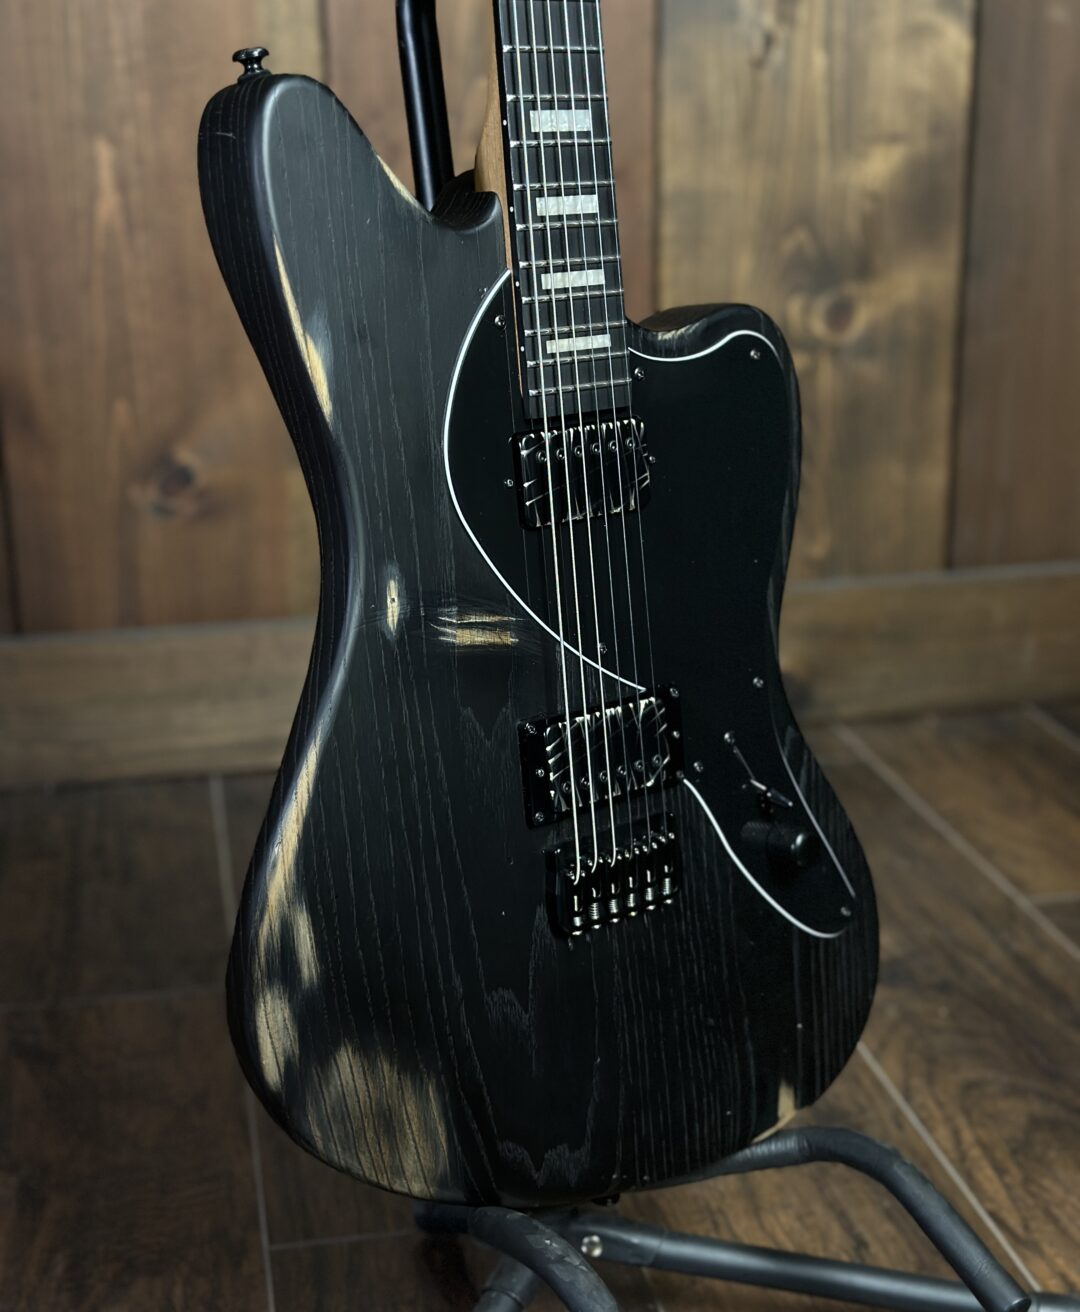 NAMM '23 SPECIAL - Aged Growler Baritone - Rustic Black (Loaded with Bareknuckle Painkiller Pickups)